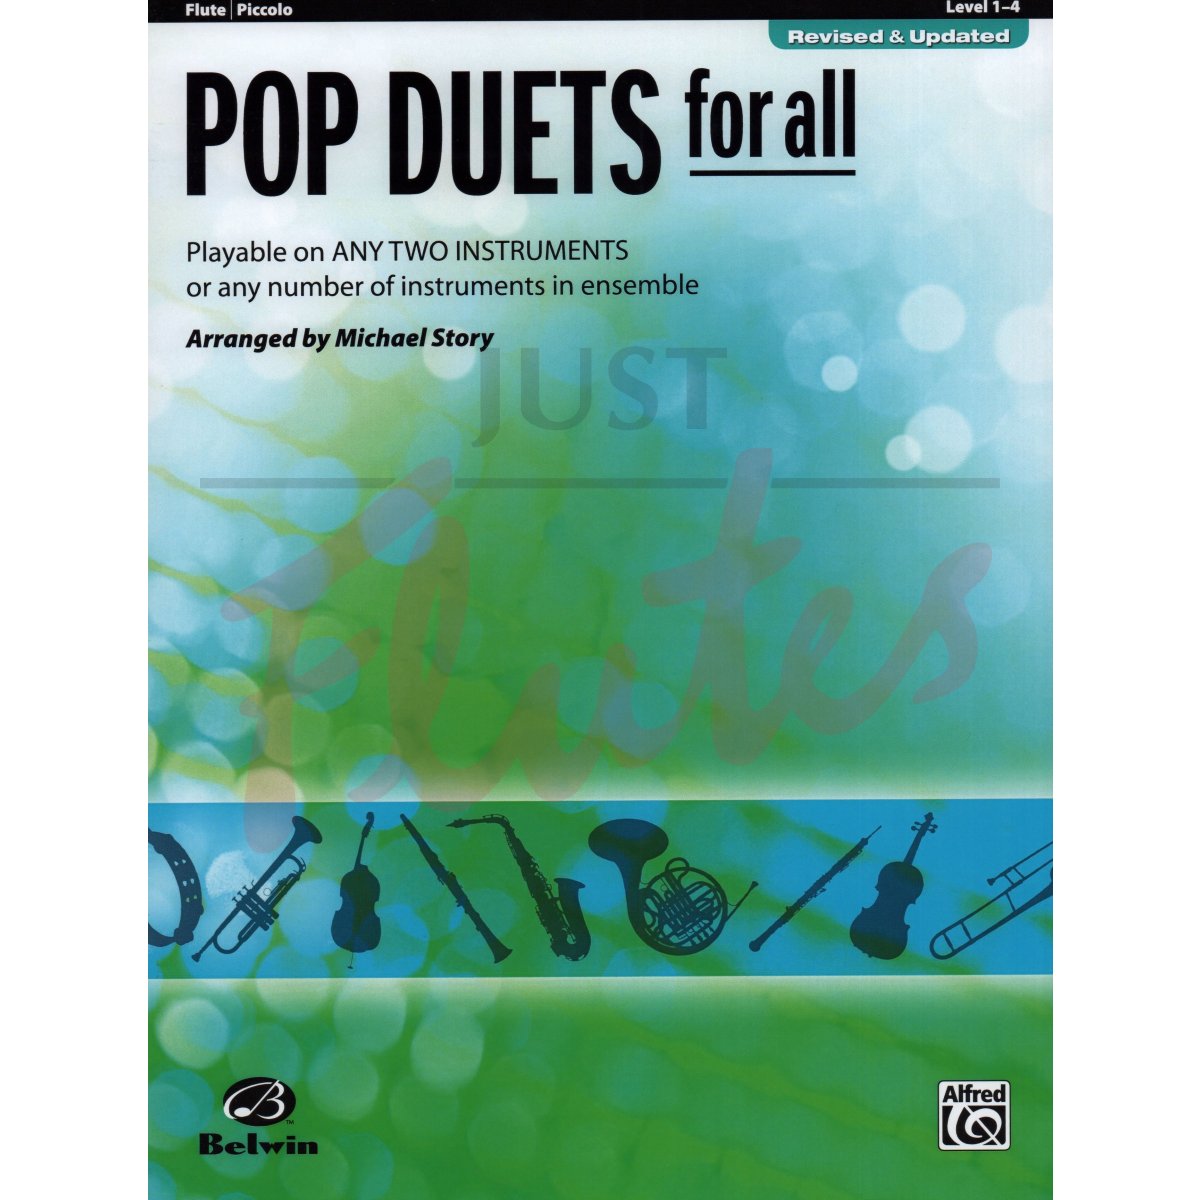 Pop Duets for All [Flute/Piccolo]